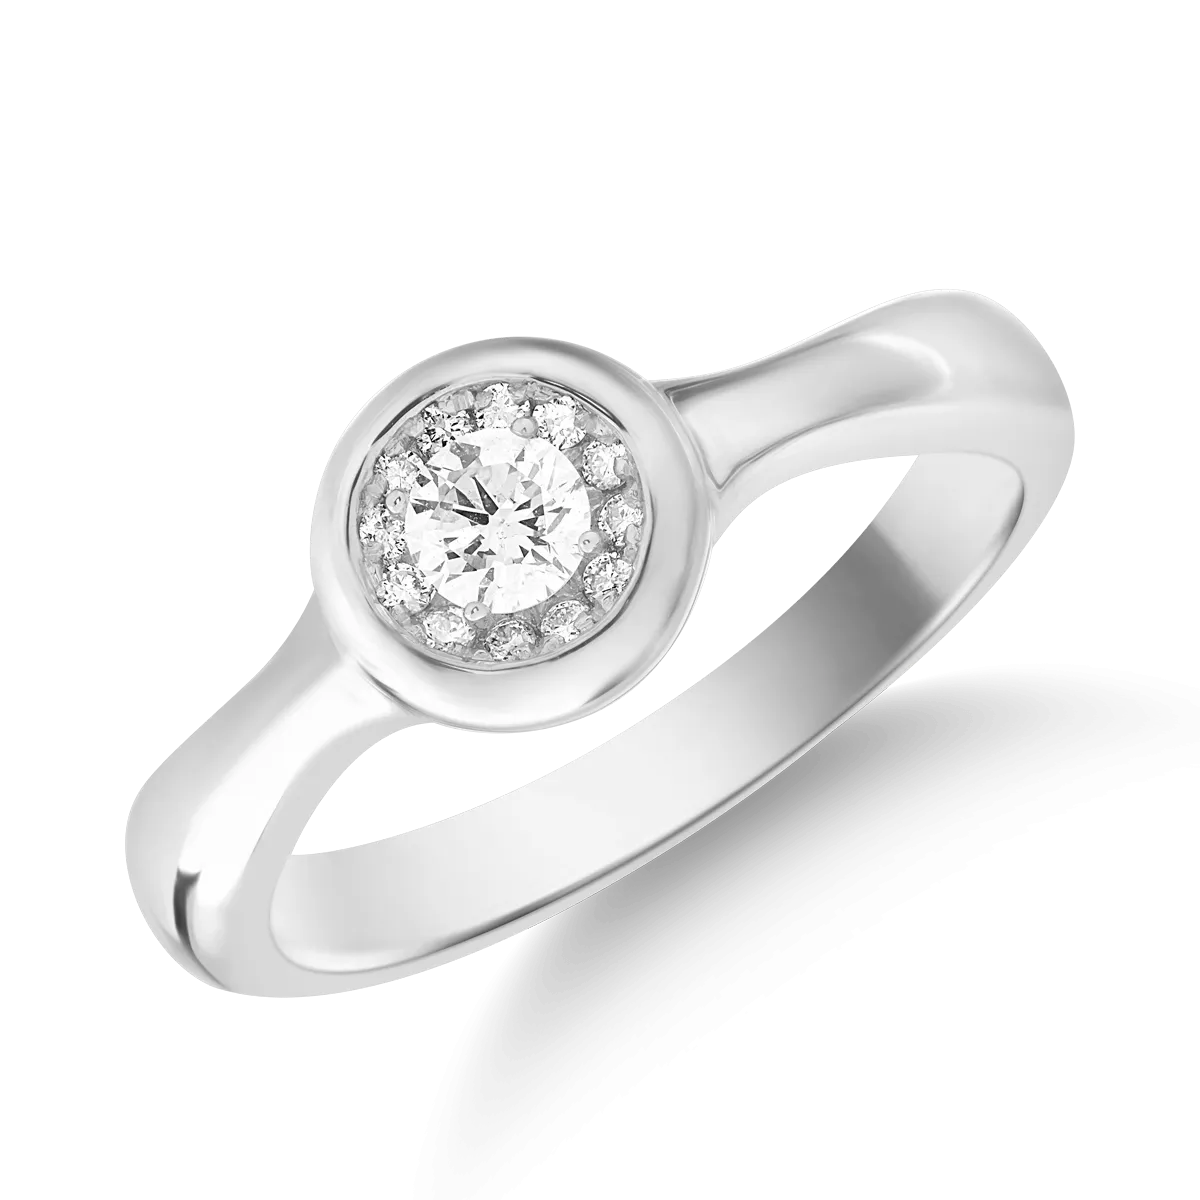 18K white gold ring with 0.12ct diamond and 0.055ct diamonds